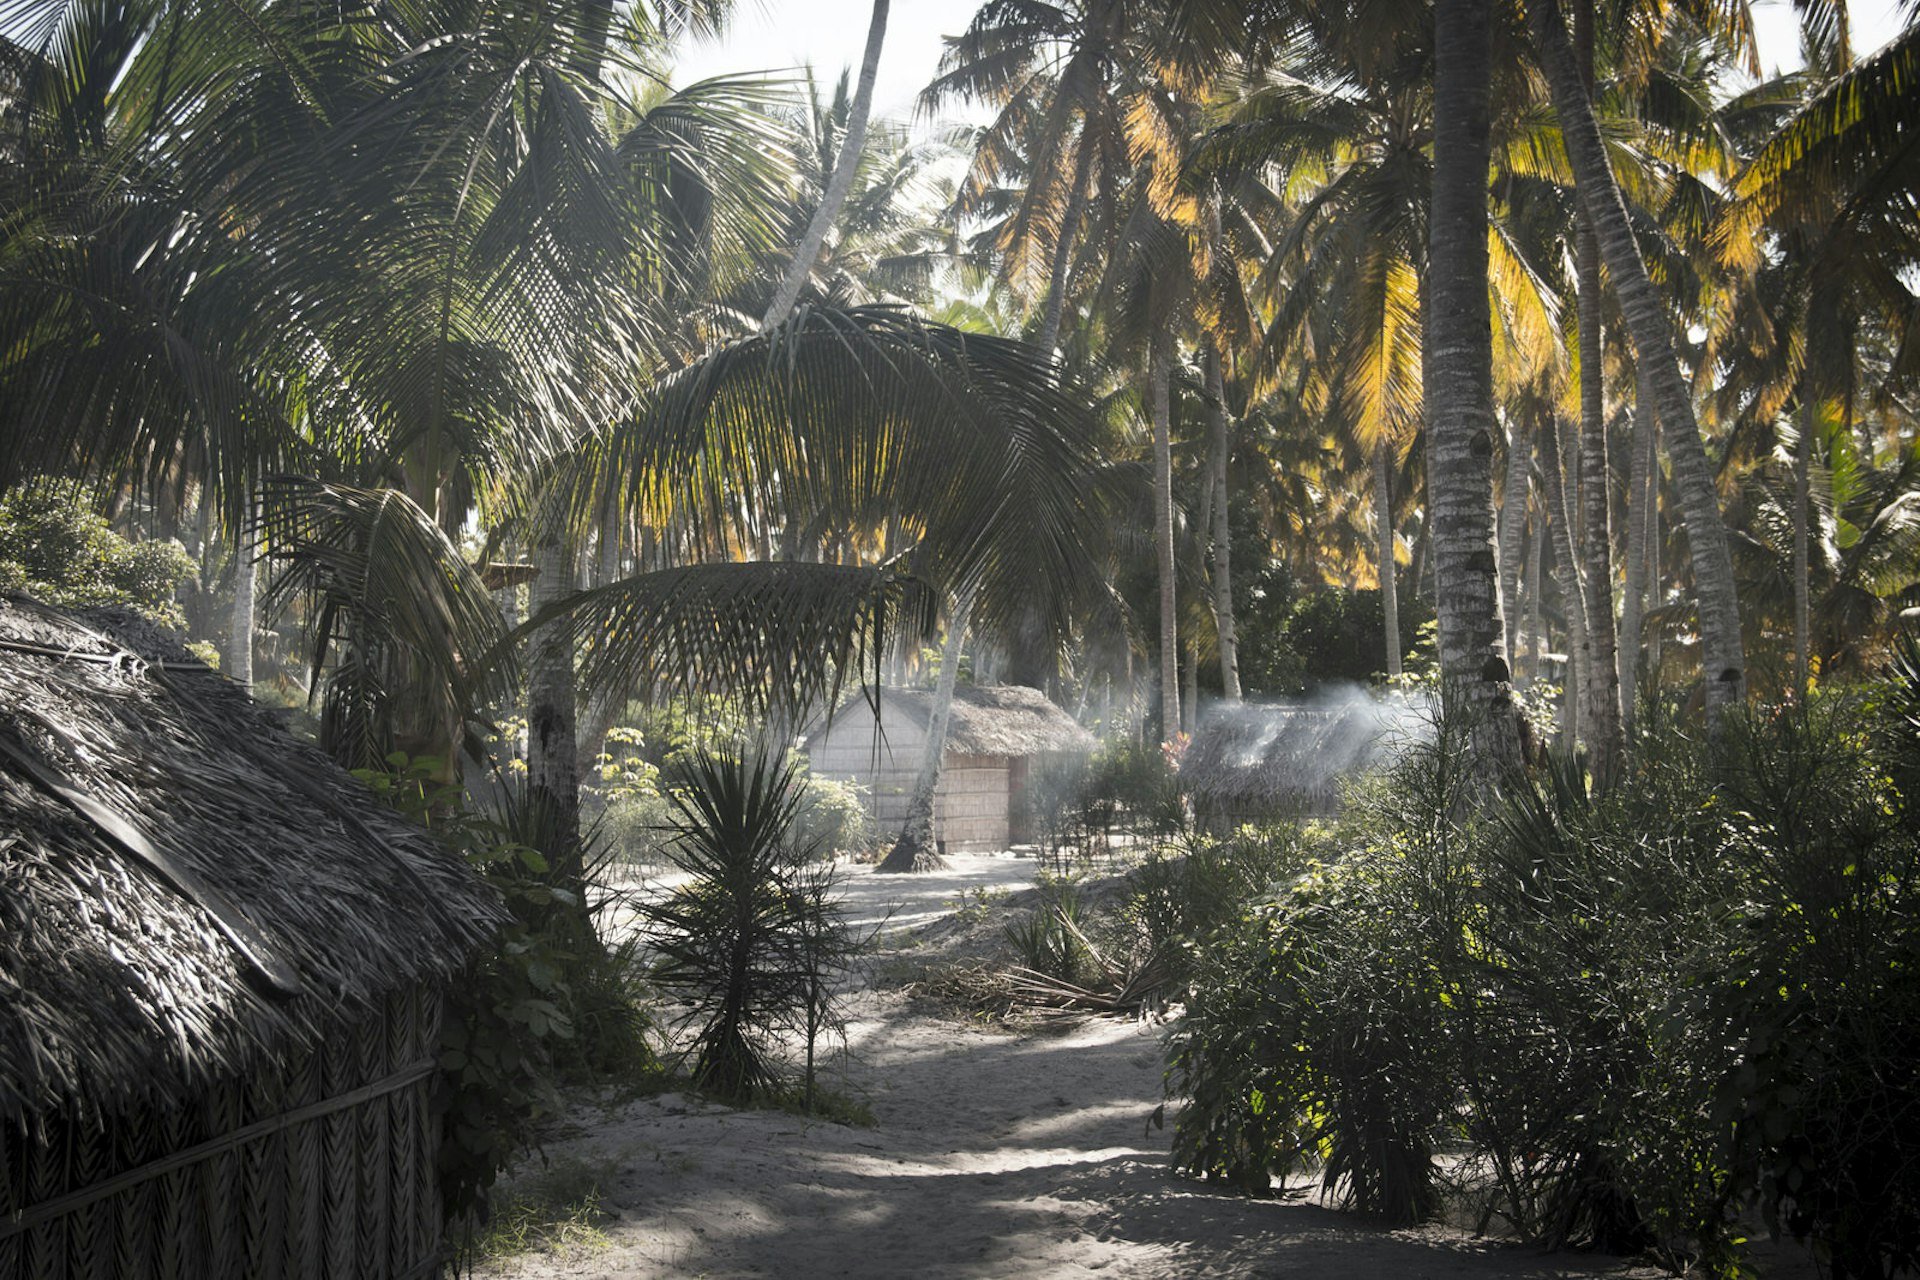 This image looks down a dirt road that winds underneath a canopy of palms towards some simple thatched village huts in Tofo in Inhambane, Mozambique © nicolasdecorte / Getty Images